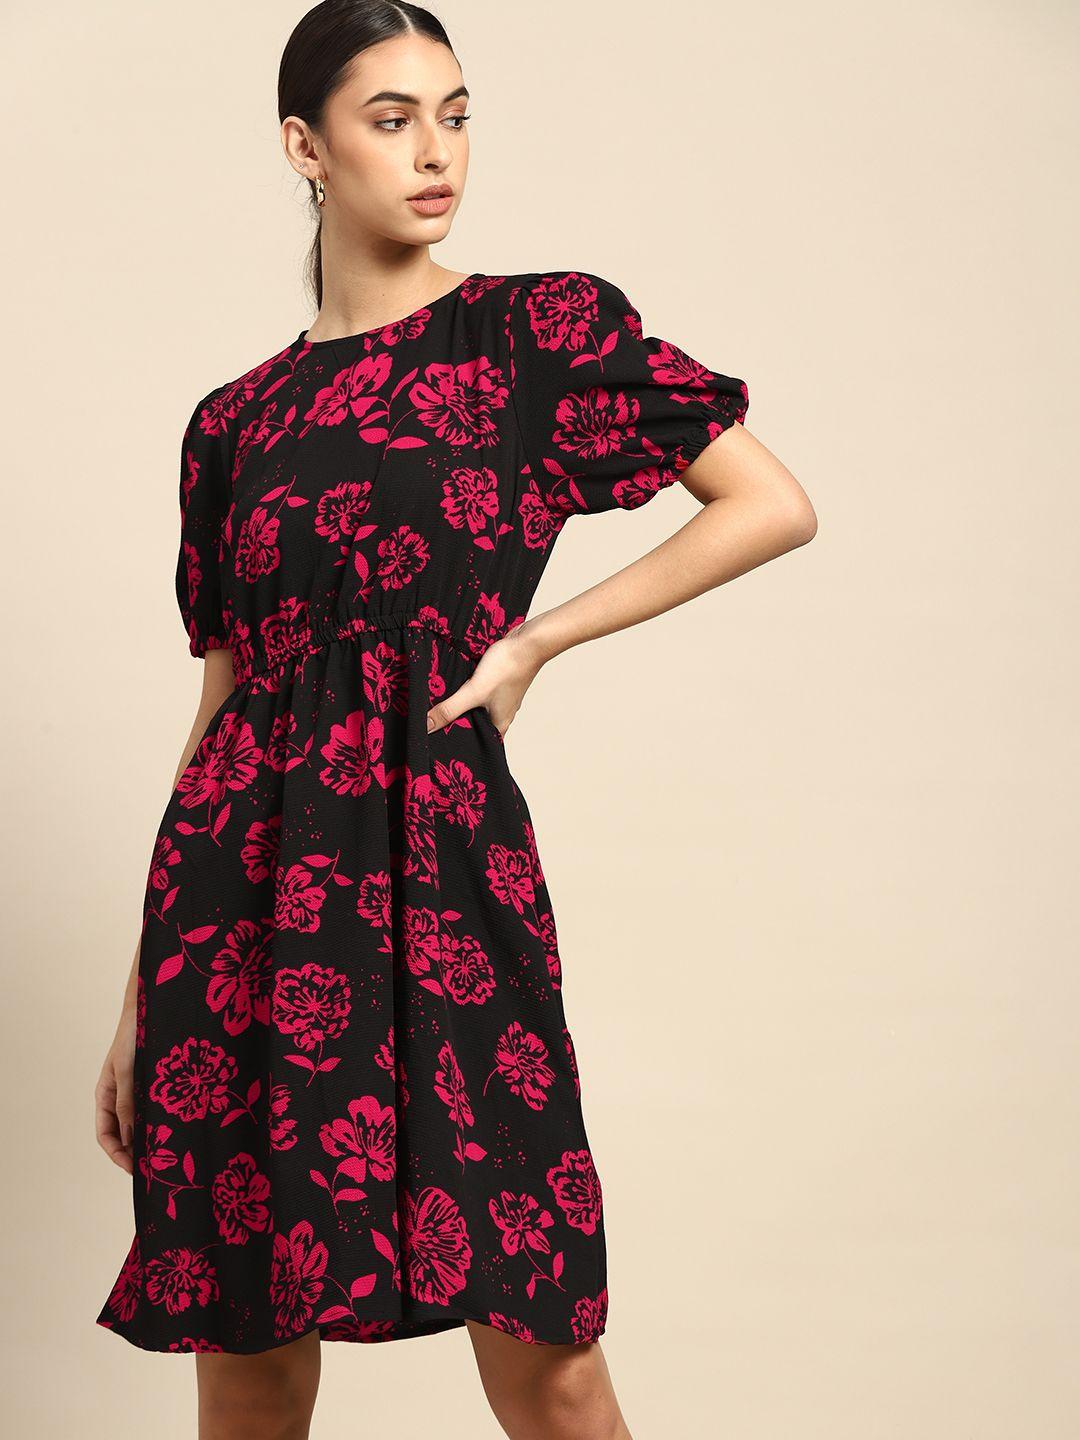 all about you black & pink floral printed a-line dress